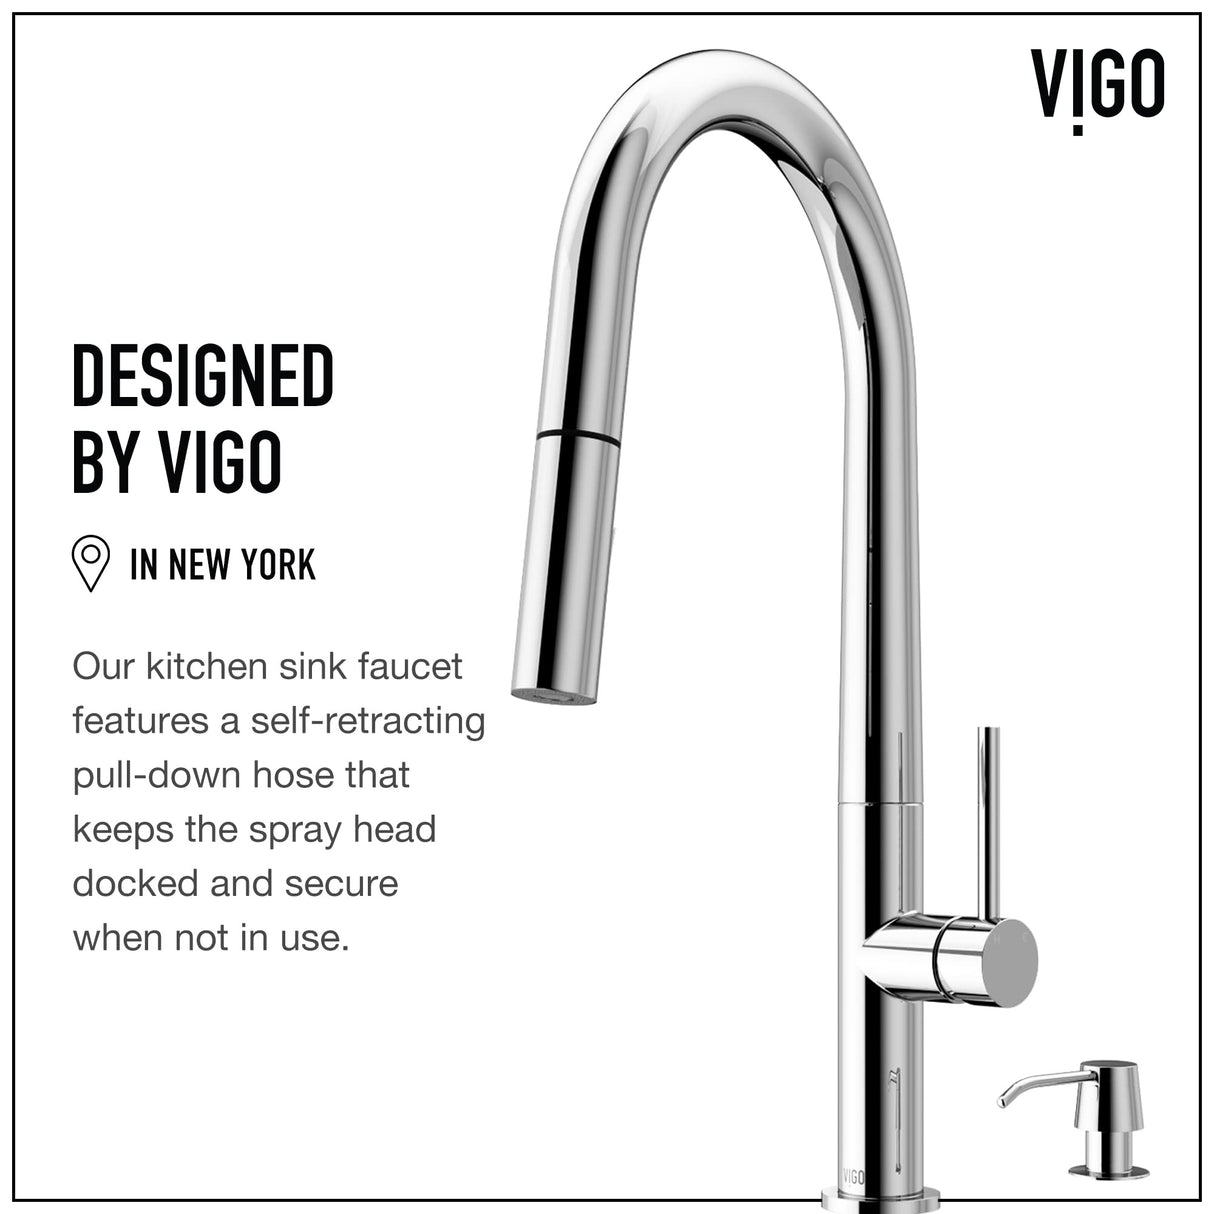 VIGO Greenwich Chrome Kitchen Faucet with Pull-Down Sprayer | Solid Brass Faucet for Kitchen Sink with Soap Dispenser | Single-Handle Kitchen Sink Faucet with Dual Functioning Sink Sprayer